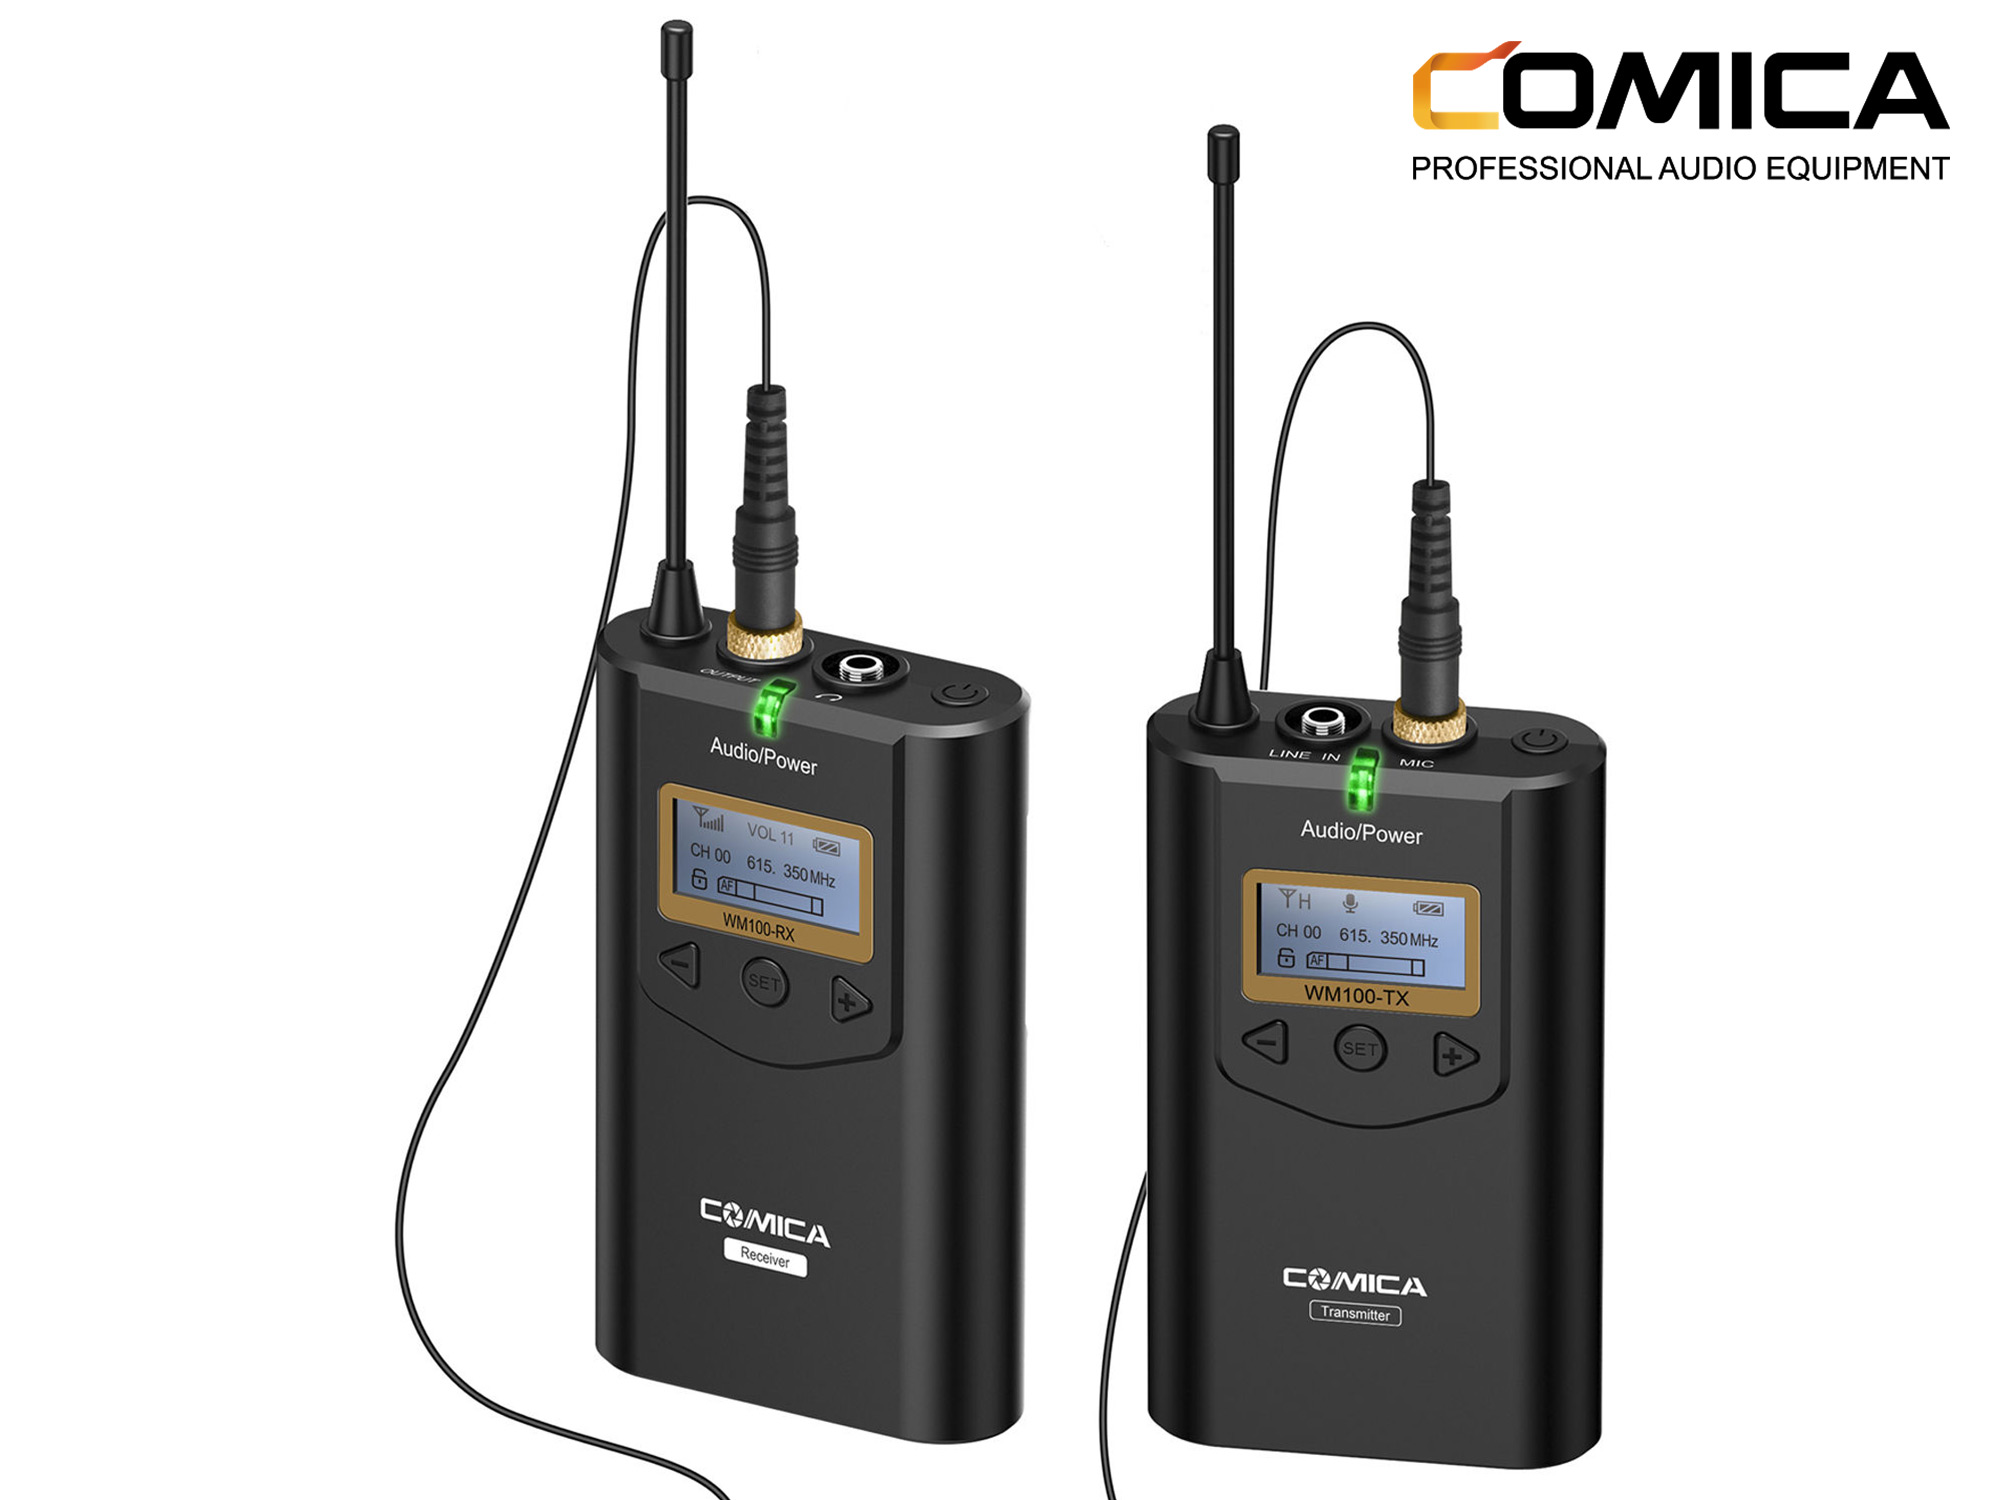 Comica UHF 48 CH and 100M Working Distance Wireless Mic with 1-Transmitter and 1-Receiver